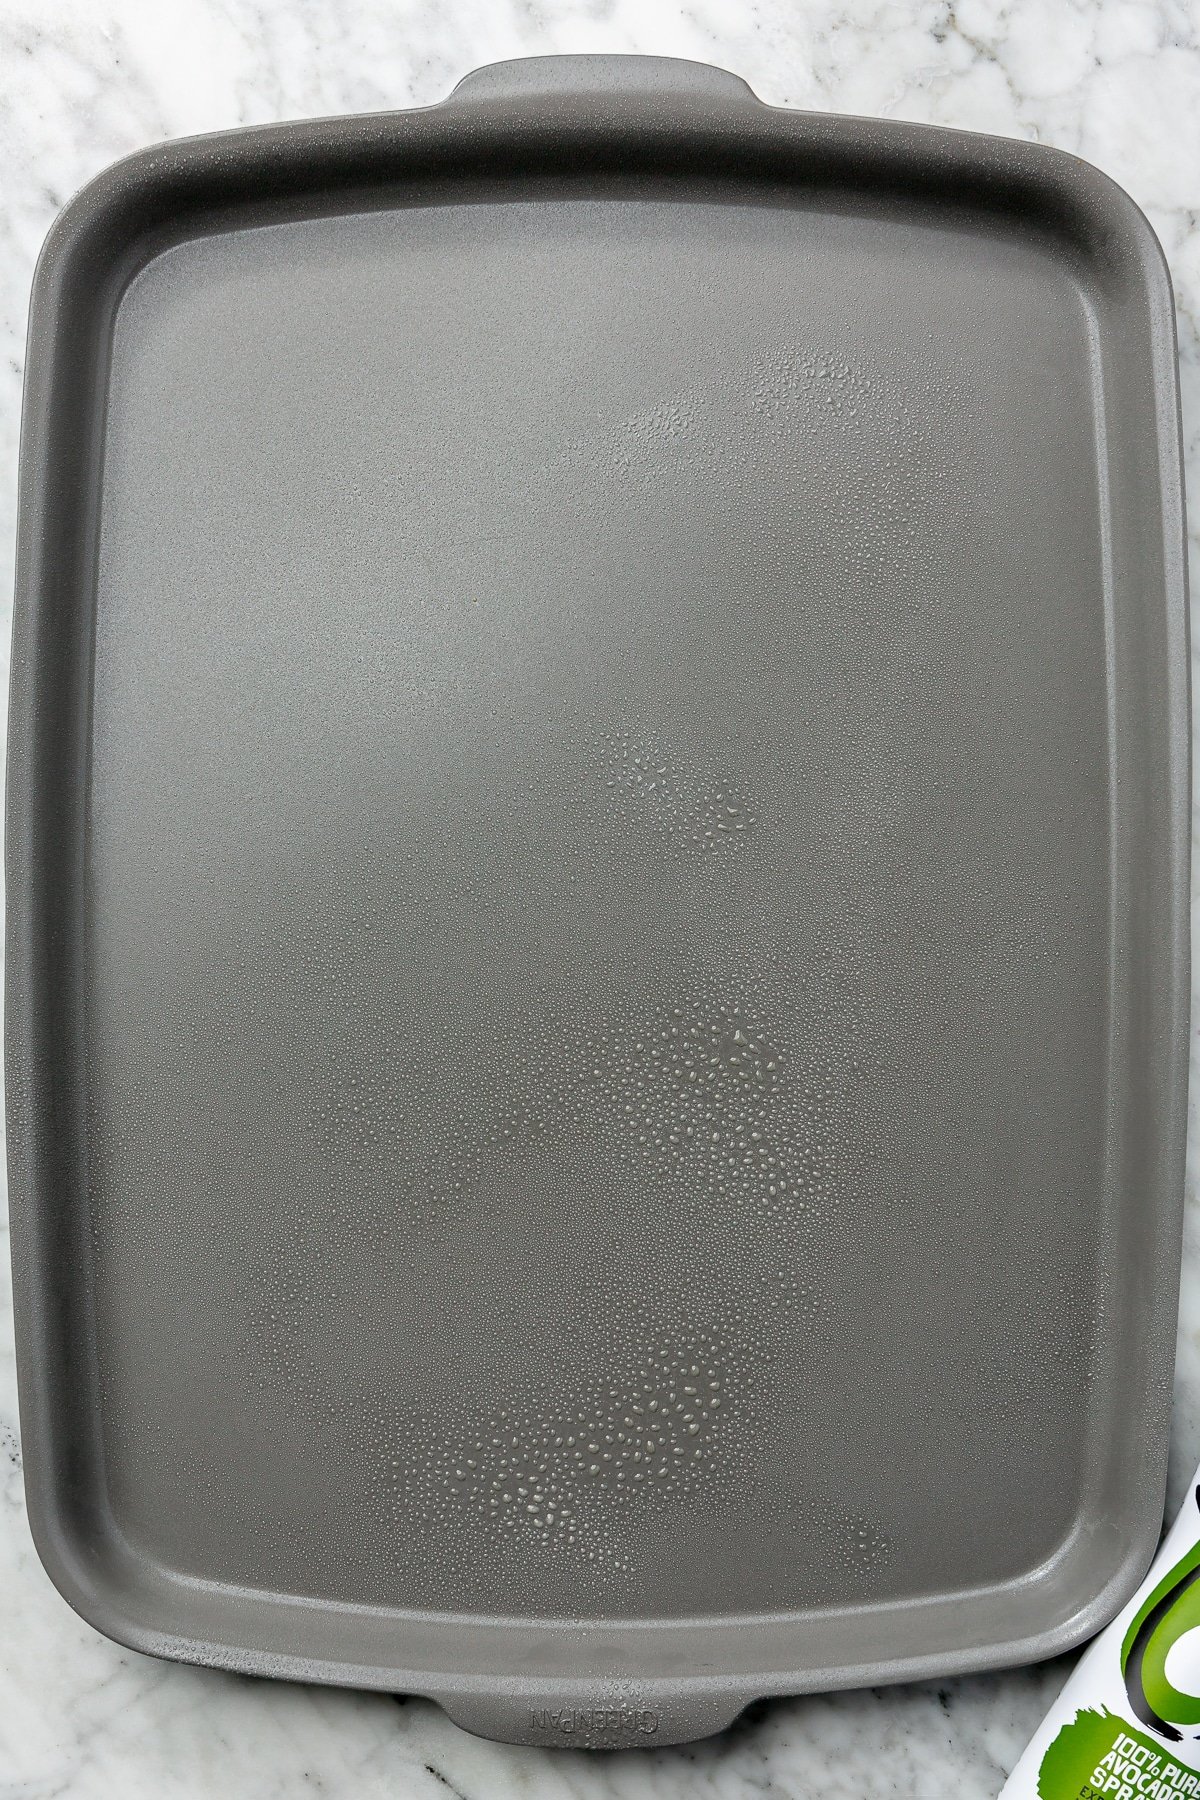 A nonstick baking pan has been greased and sits on a marble countertop.